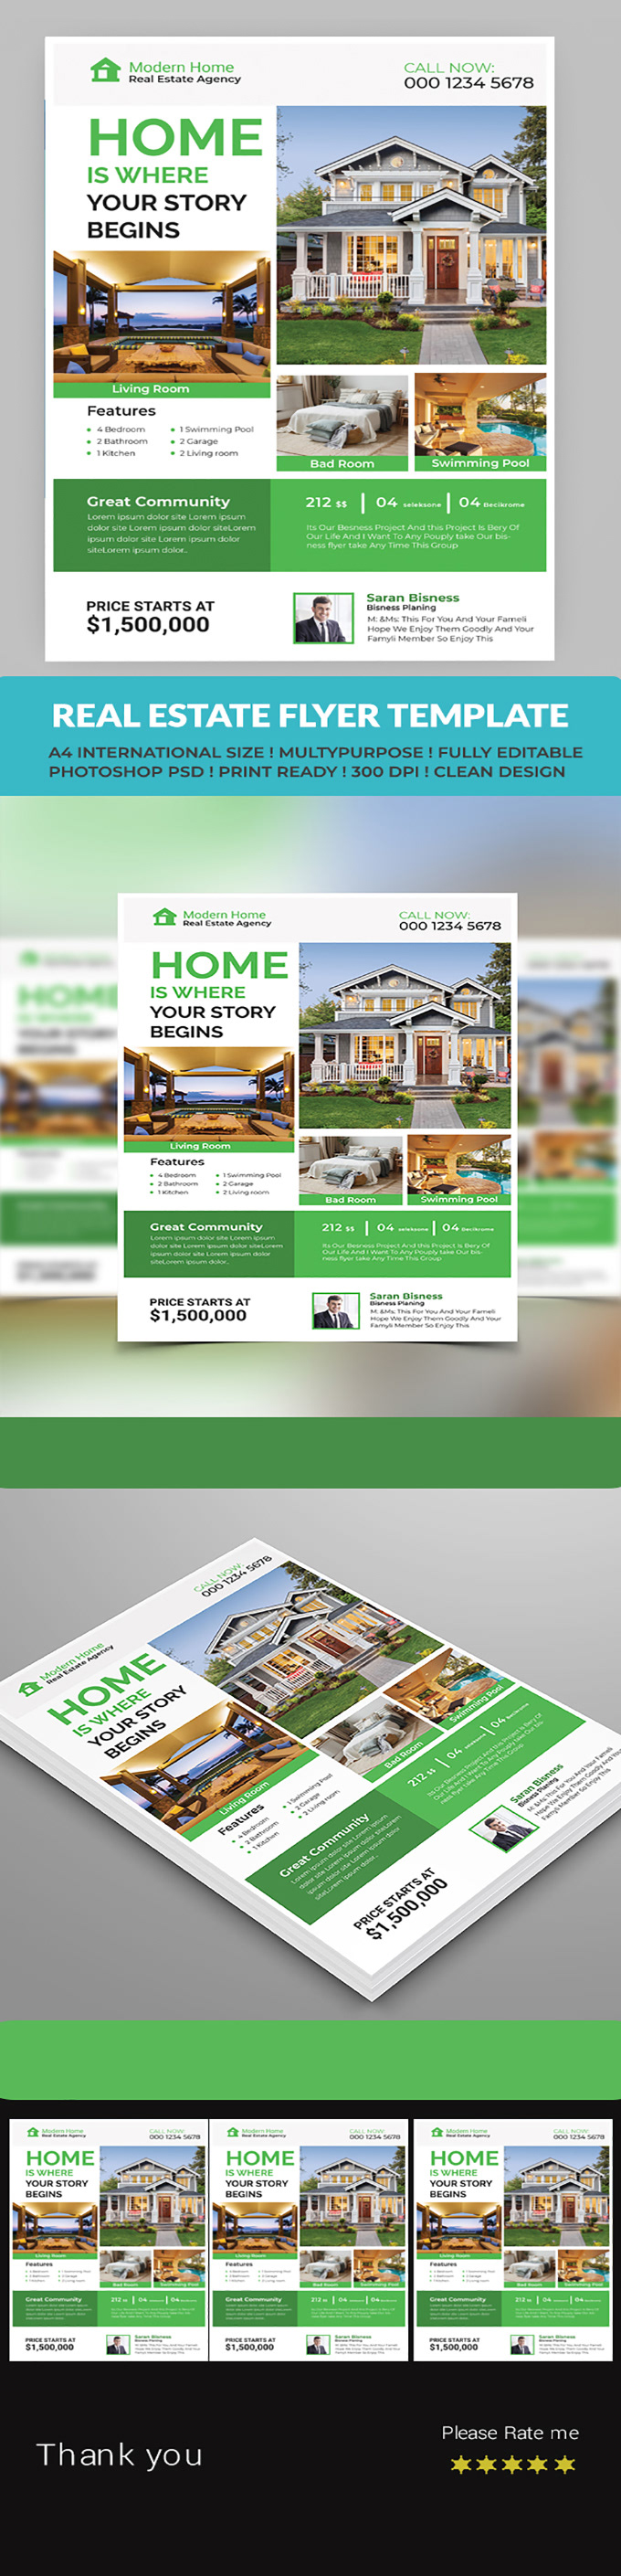 poster professional property property flyer real estate realtor realtor flyer renovation flyer residential